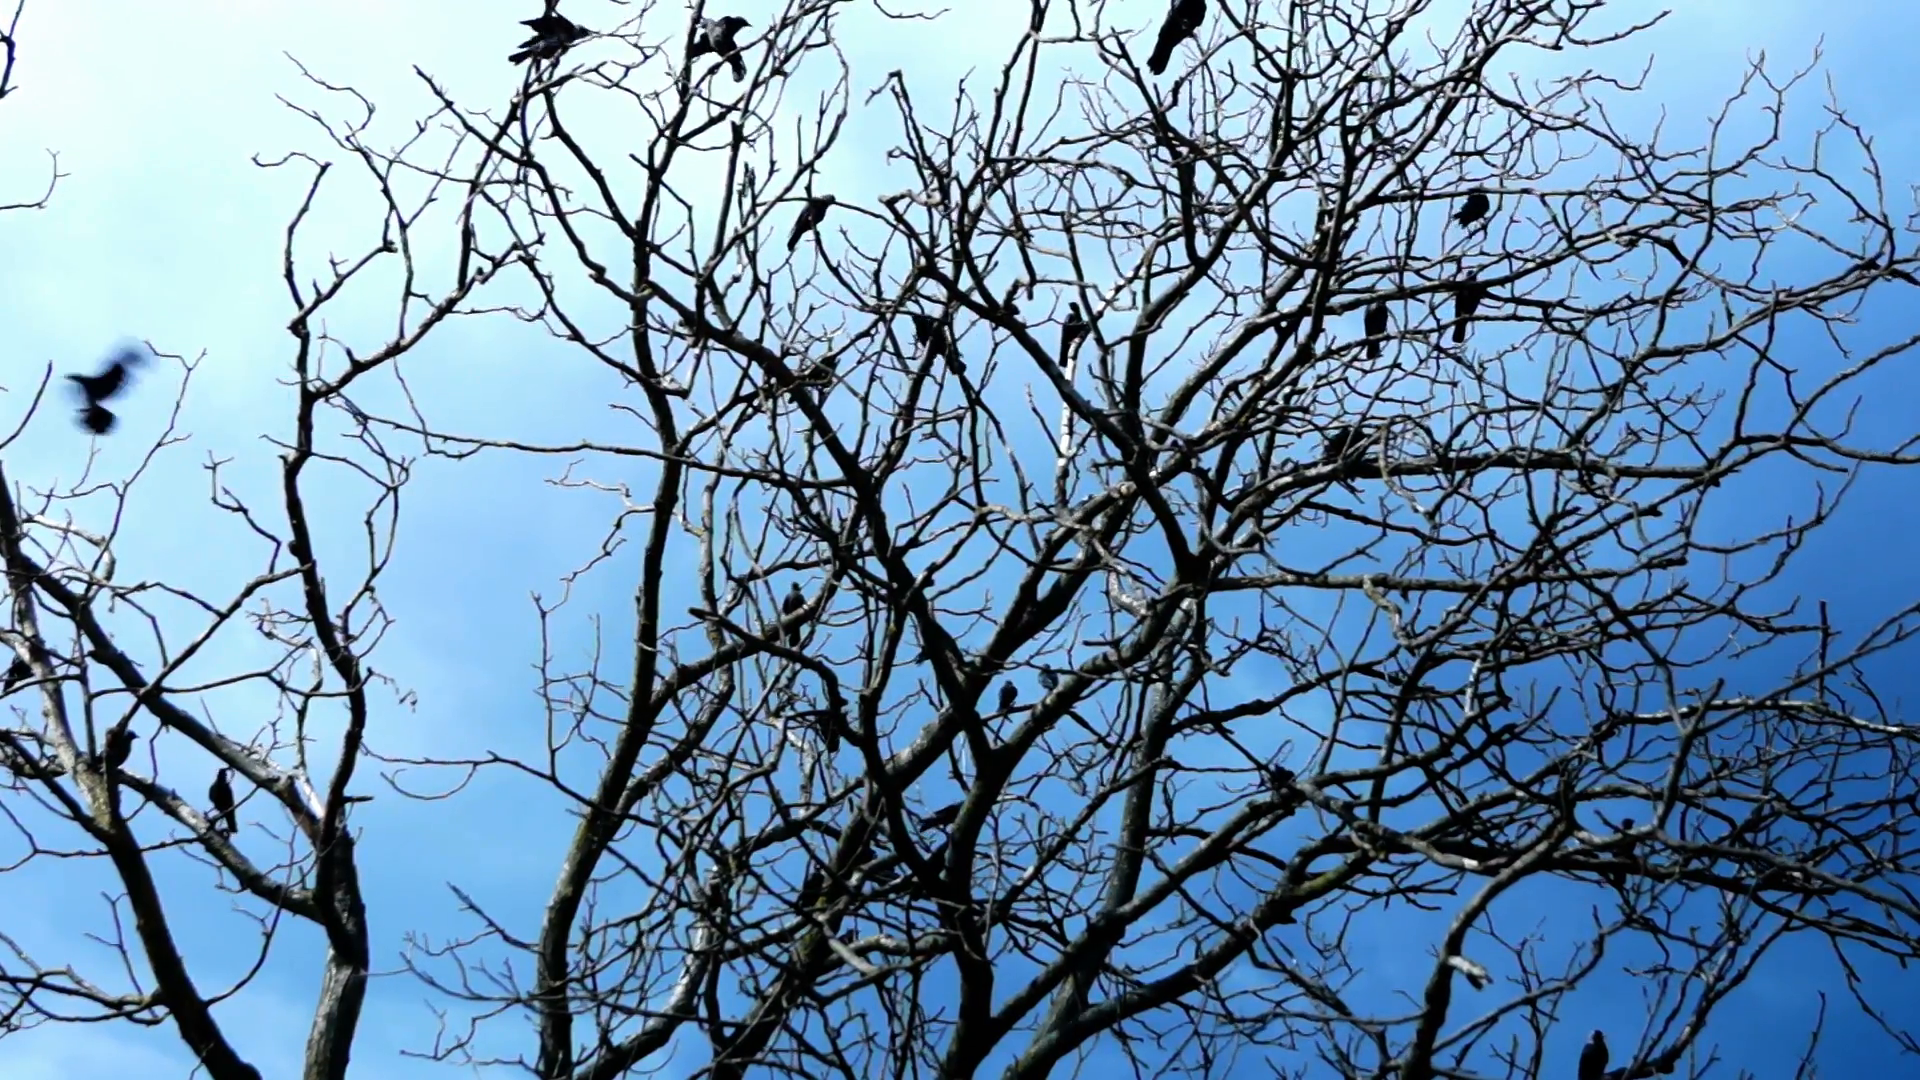 Crows In A Dry Tree On A Background Of Blue Sky Stock Video Footage ...